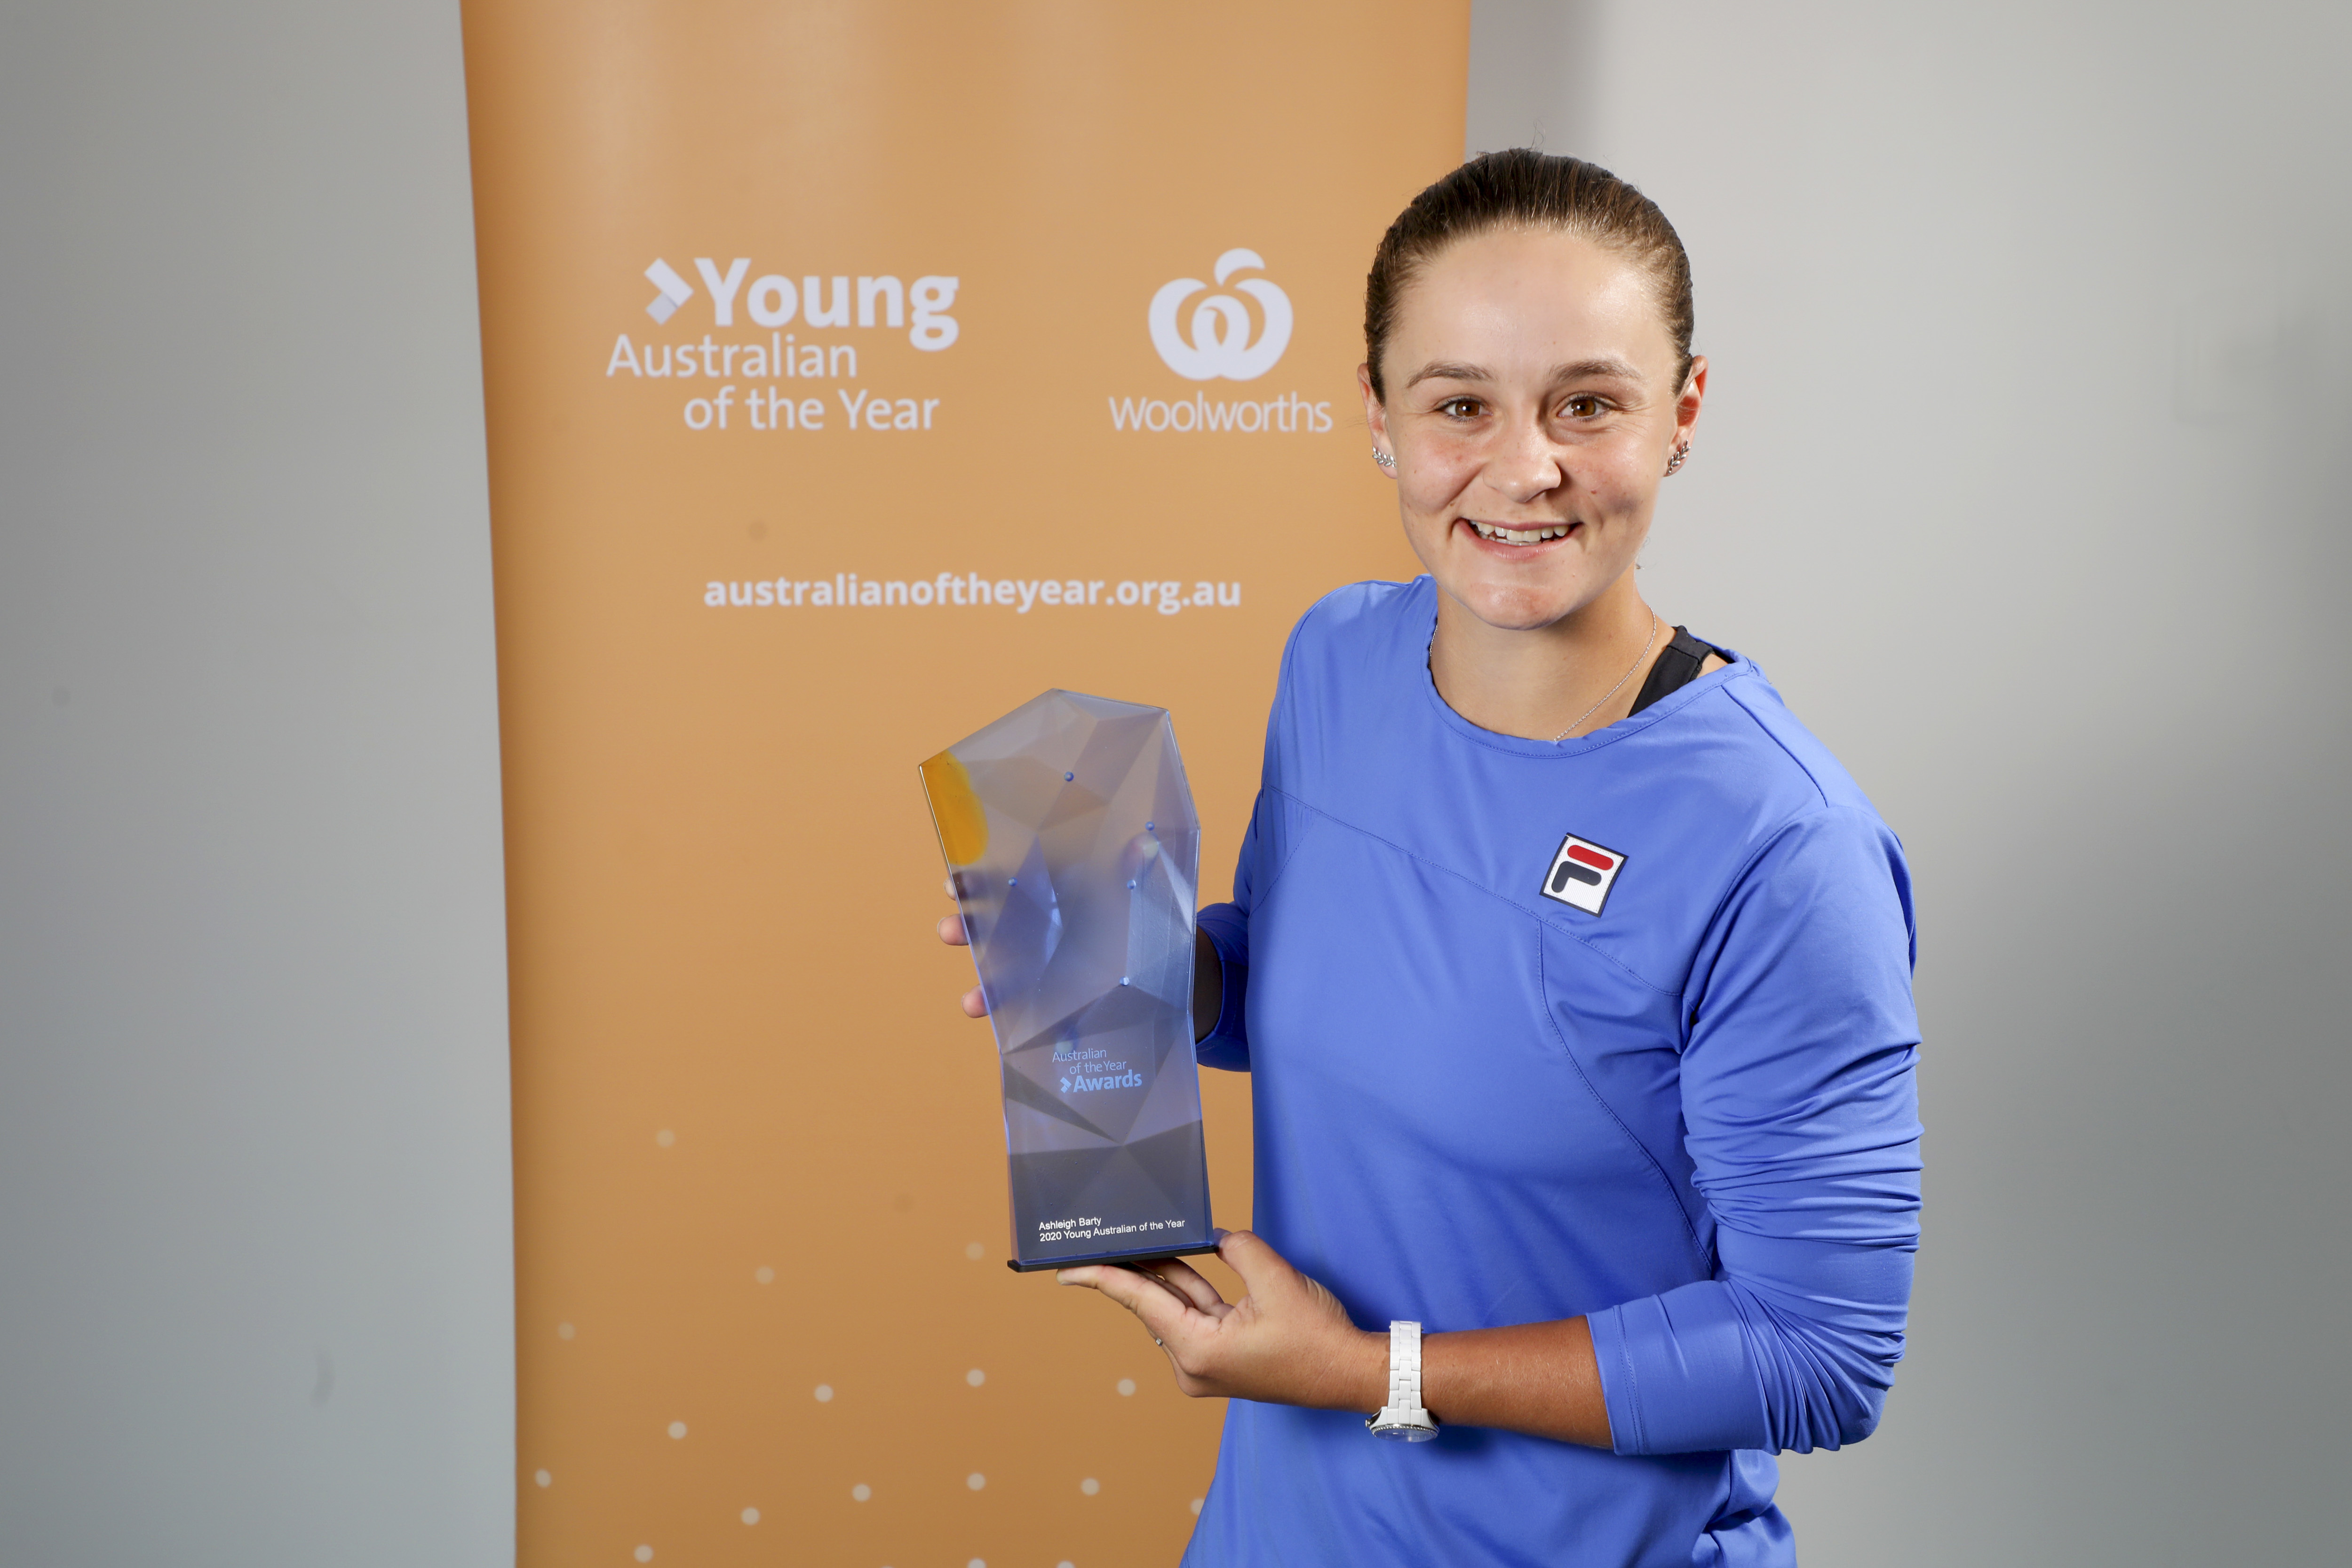 Australian tennis player Ash Barty has received the award for Young Australian of the Year.